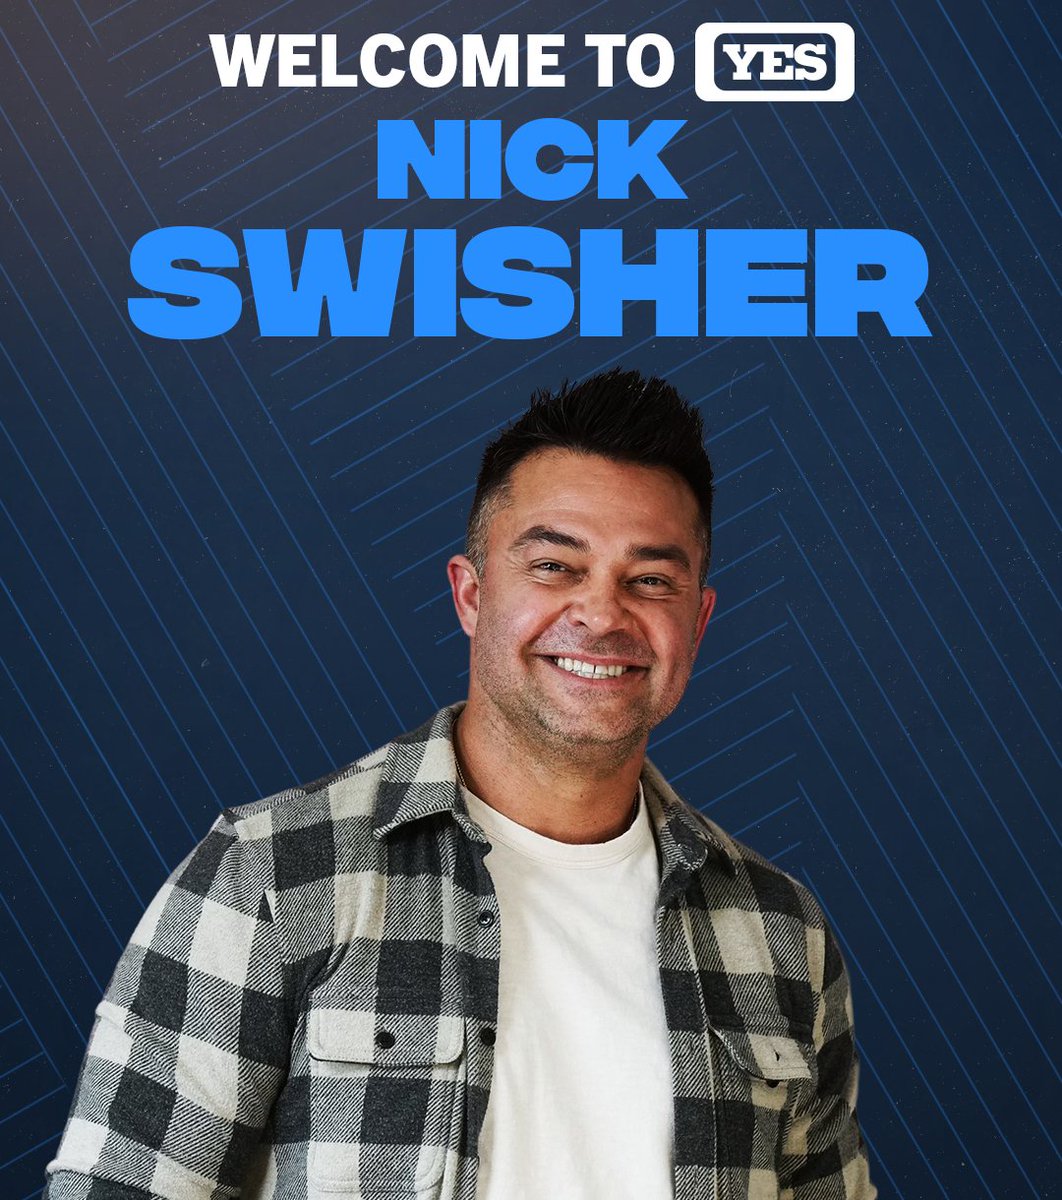 Tonight on YES & the YES App: @NickSwisher makes his debut as part of our Yankees broadcast team! He'll join @boblorenz & @JackCurryYES in the studio for Marlins-Yanks coverage starting at 5:30. Link to download: onelink.to/yesapp